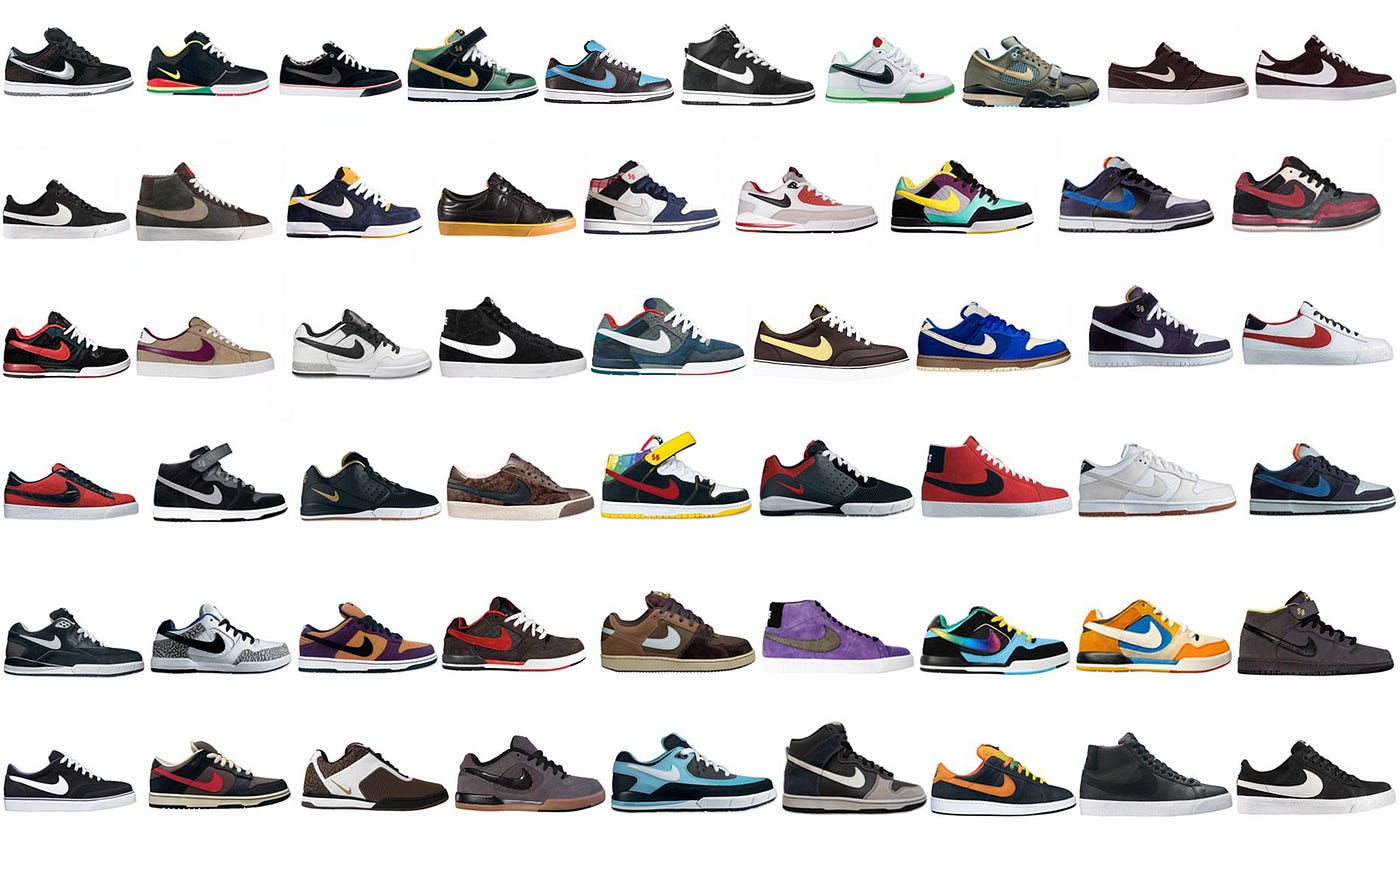 Analyzing data of Nike SB's most iconic pair: the SB Dunk | by Victor  Lourme | Medium